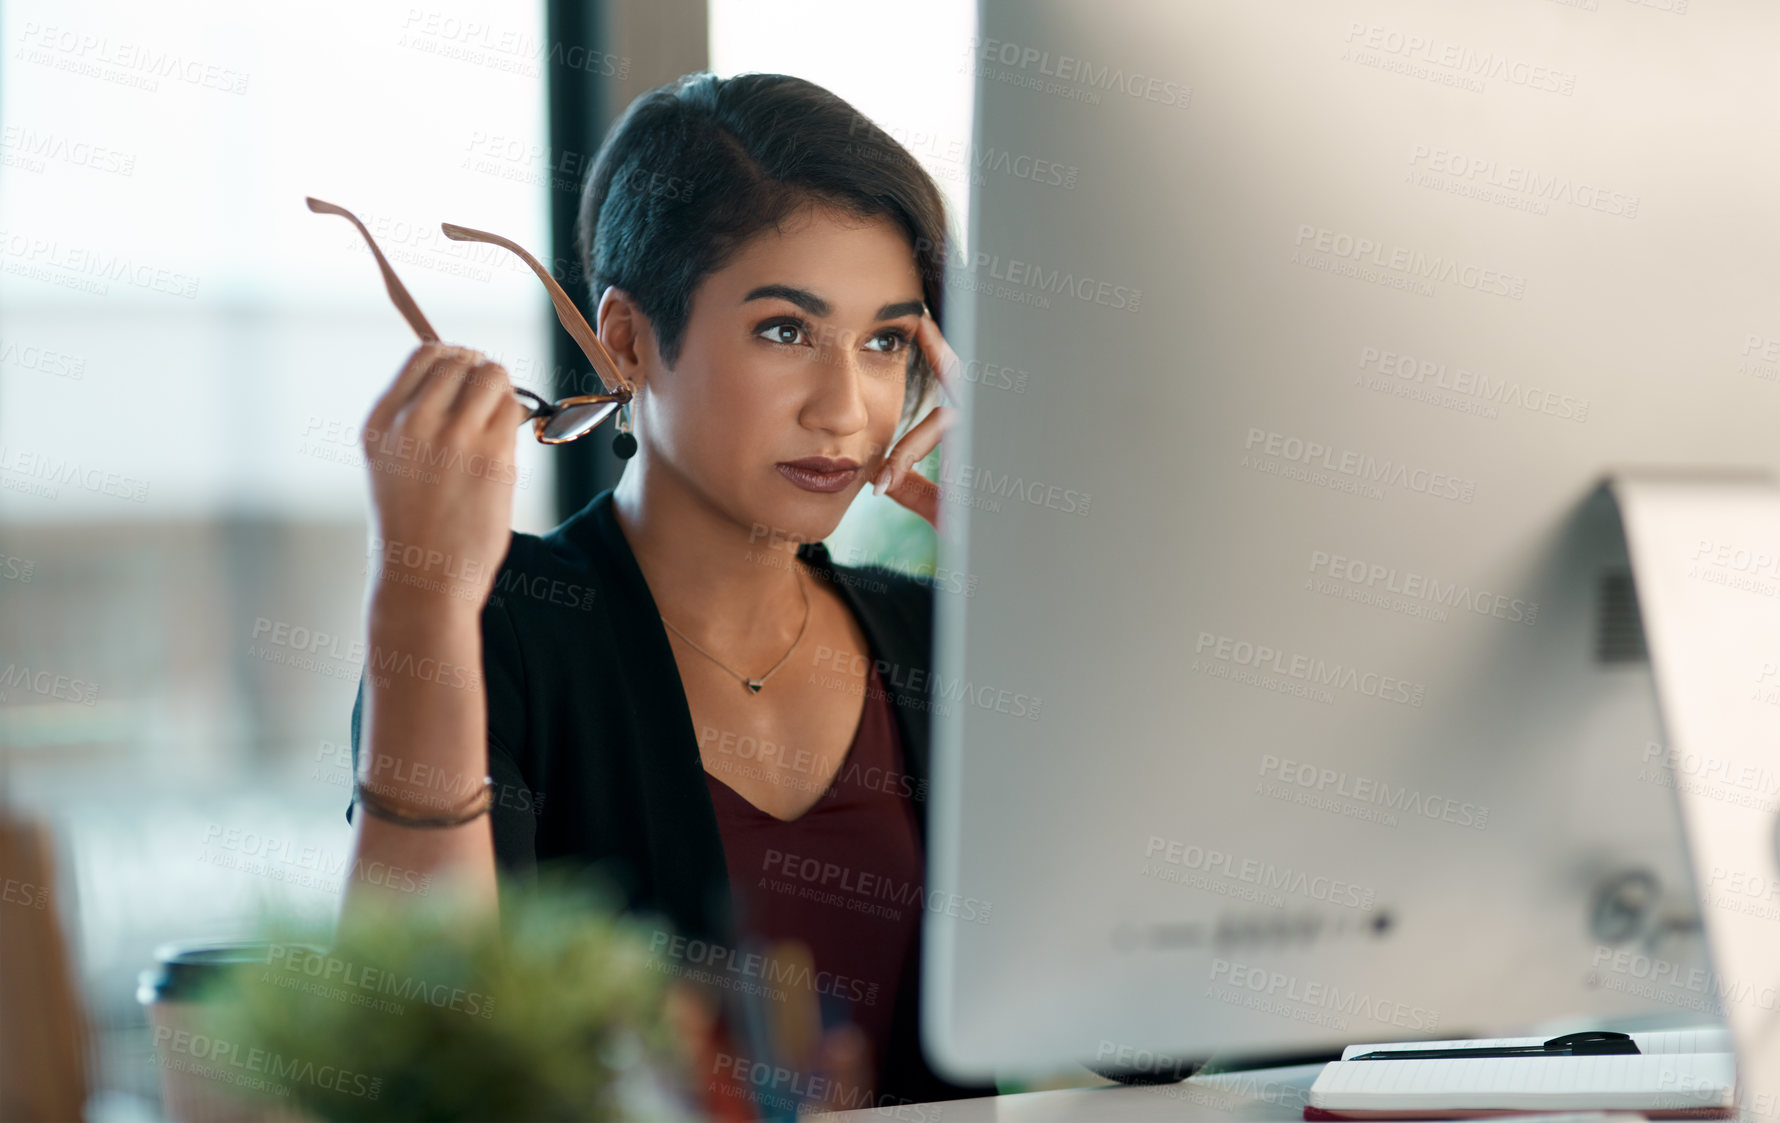 Buy stock photo Cropped shot of an attractive young businesswoman sitting alone and looking contemplative while working on her computer in the office